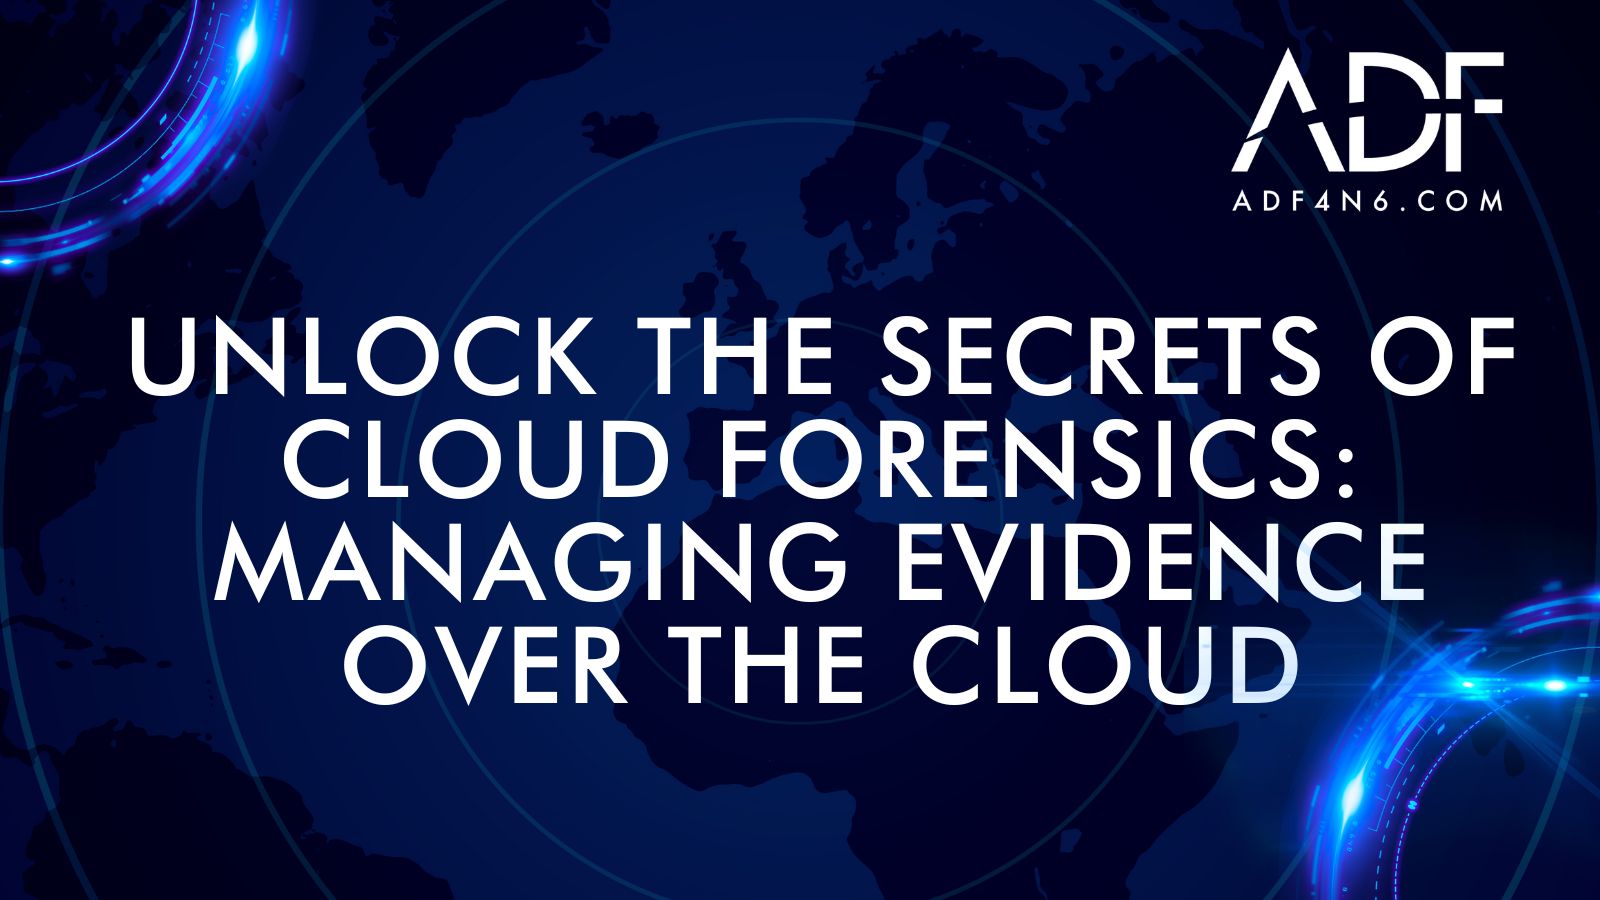 Unlock the Secret of Cloud Forensics: Managing Evidence Over the Cloud